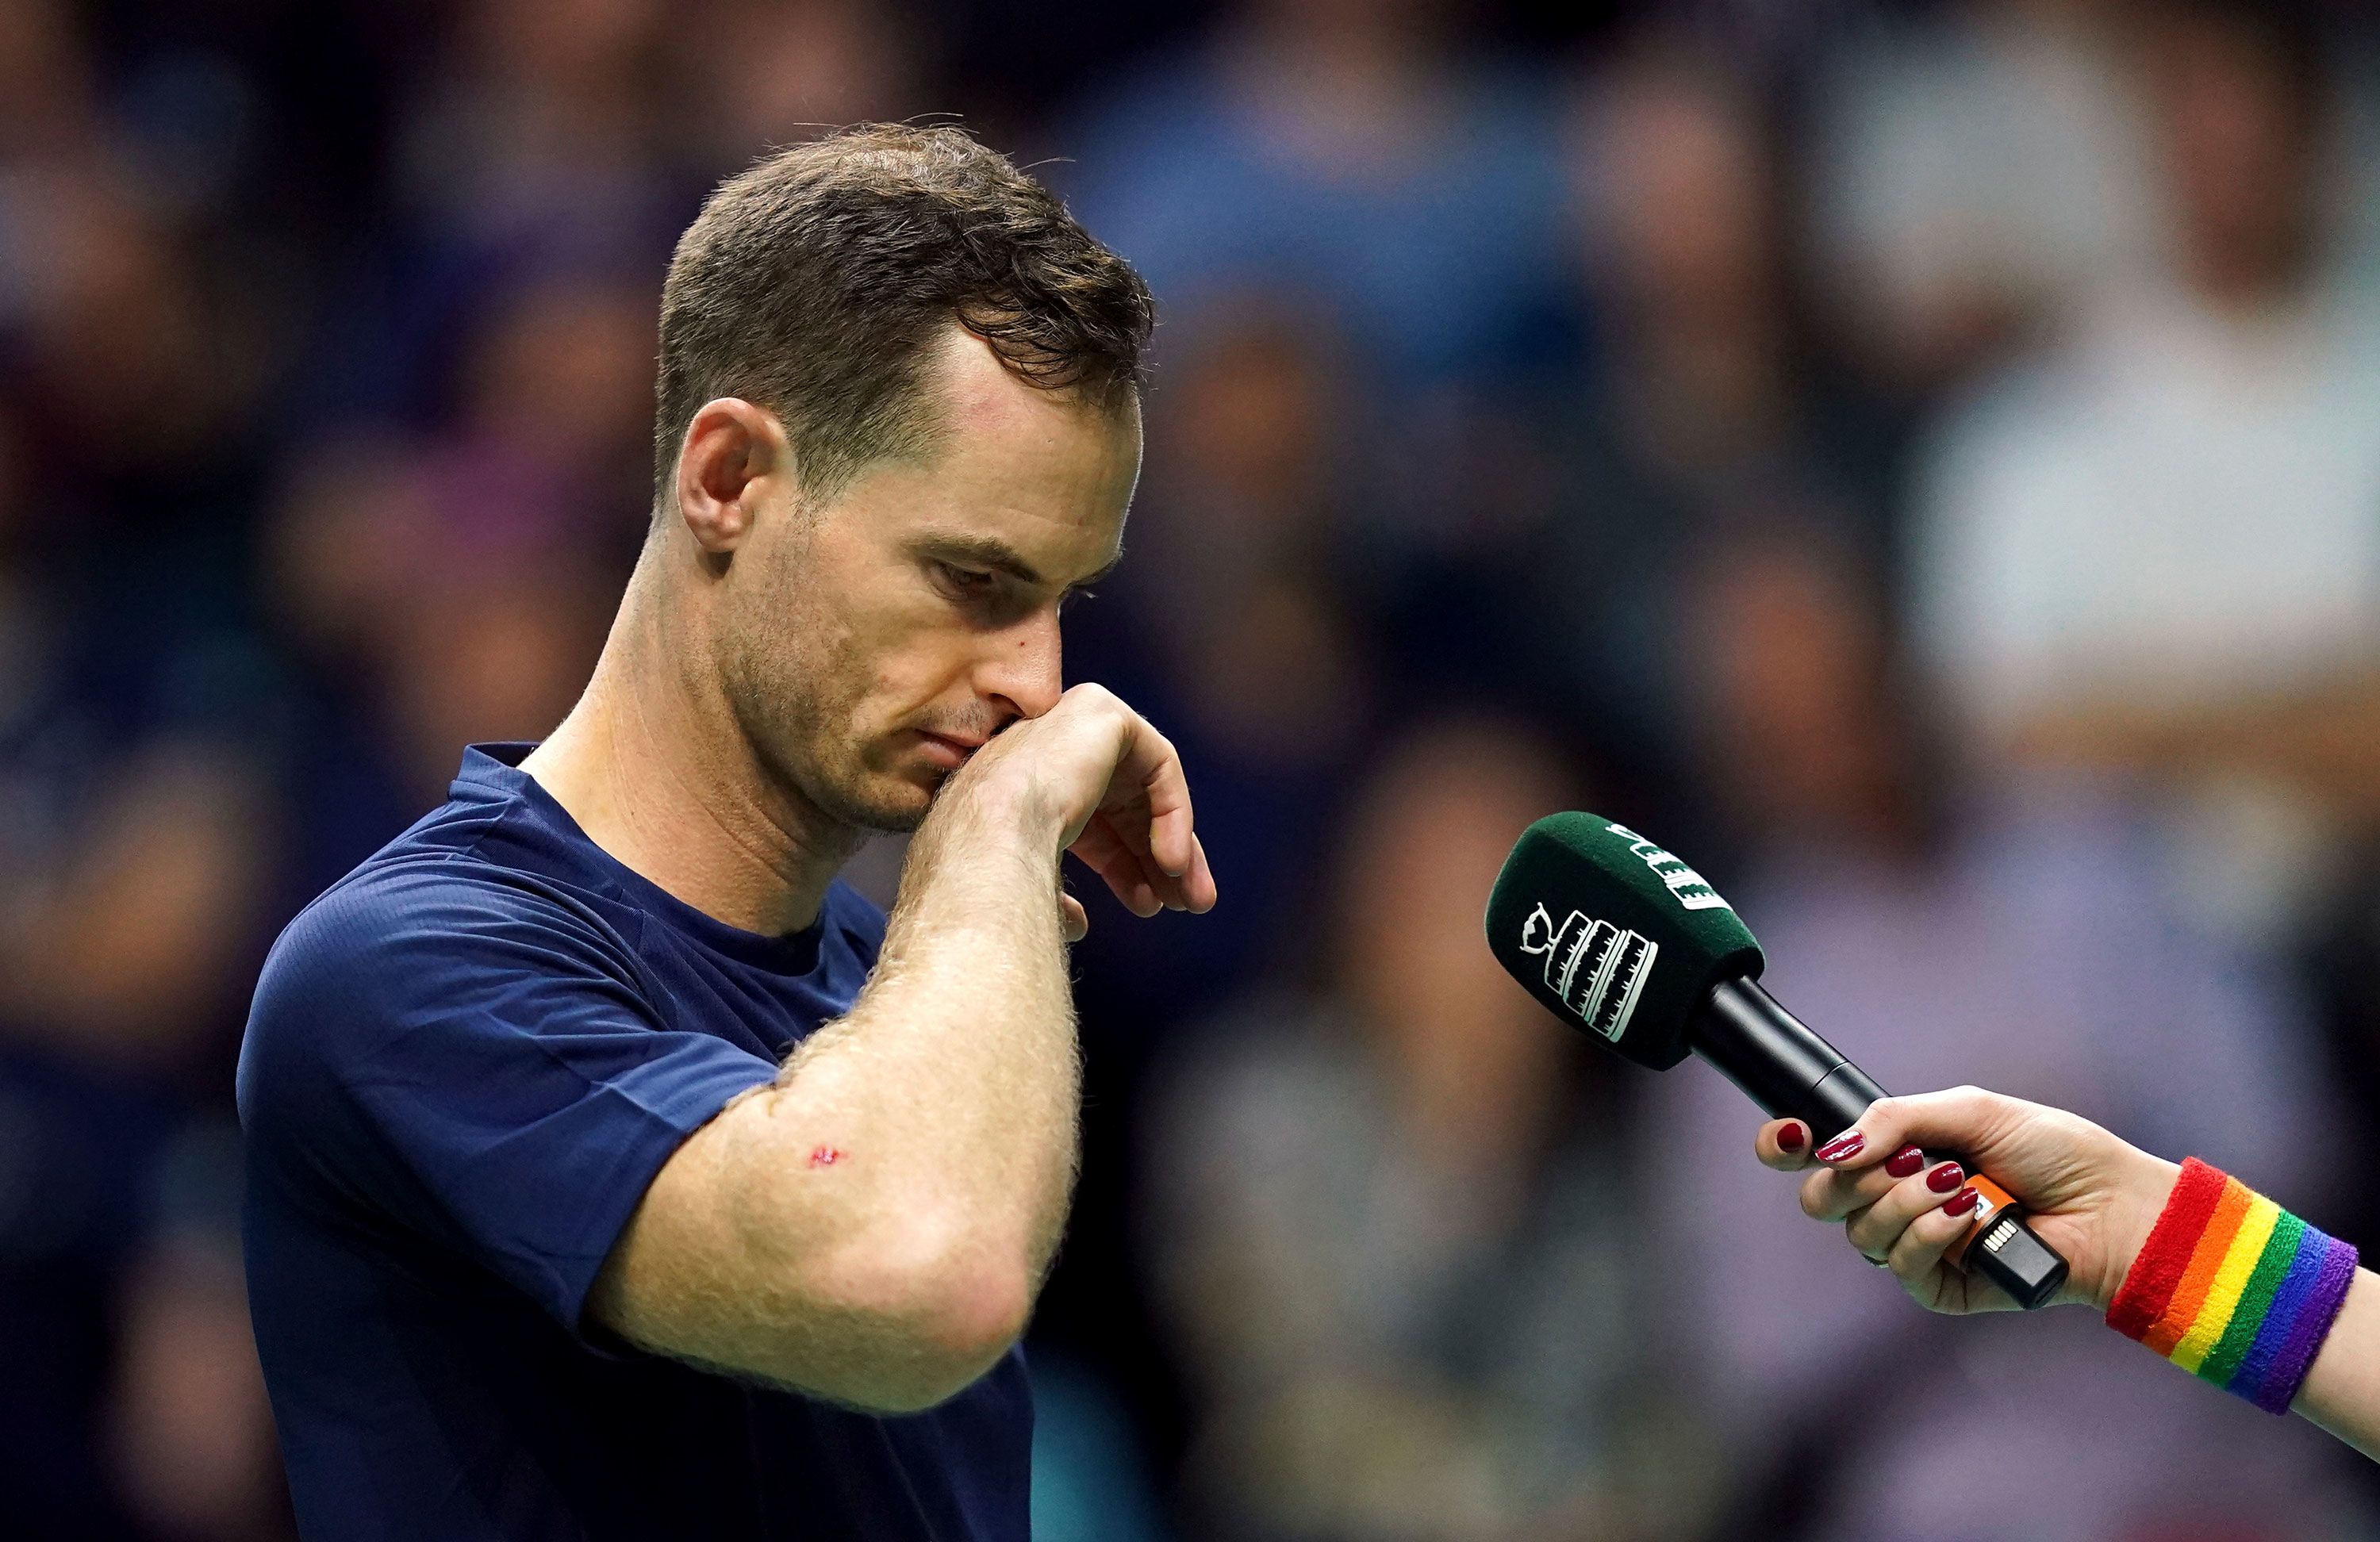 Andy Murray releases wild celebration after finally snapping losing streak 